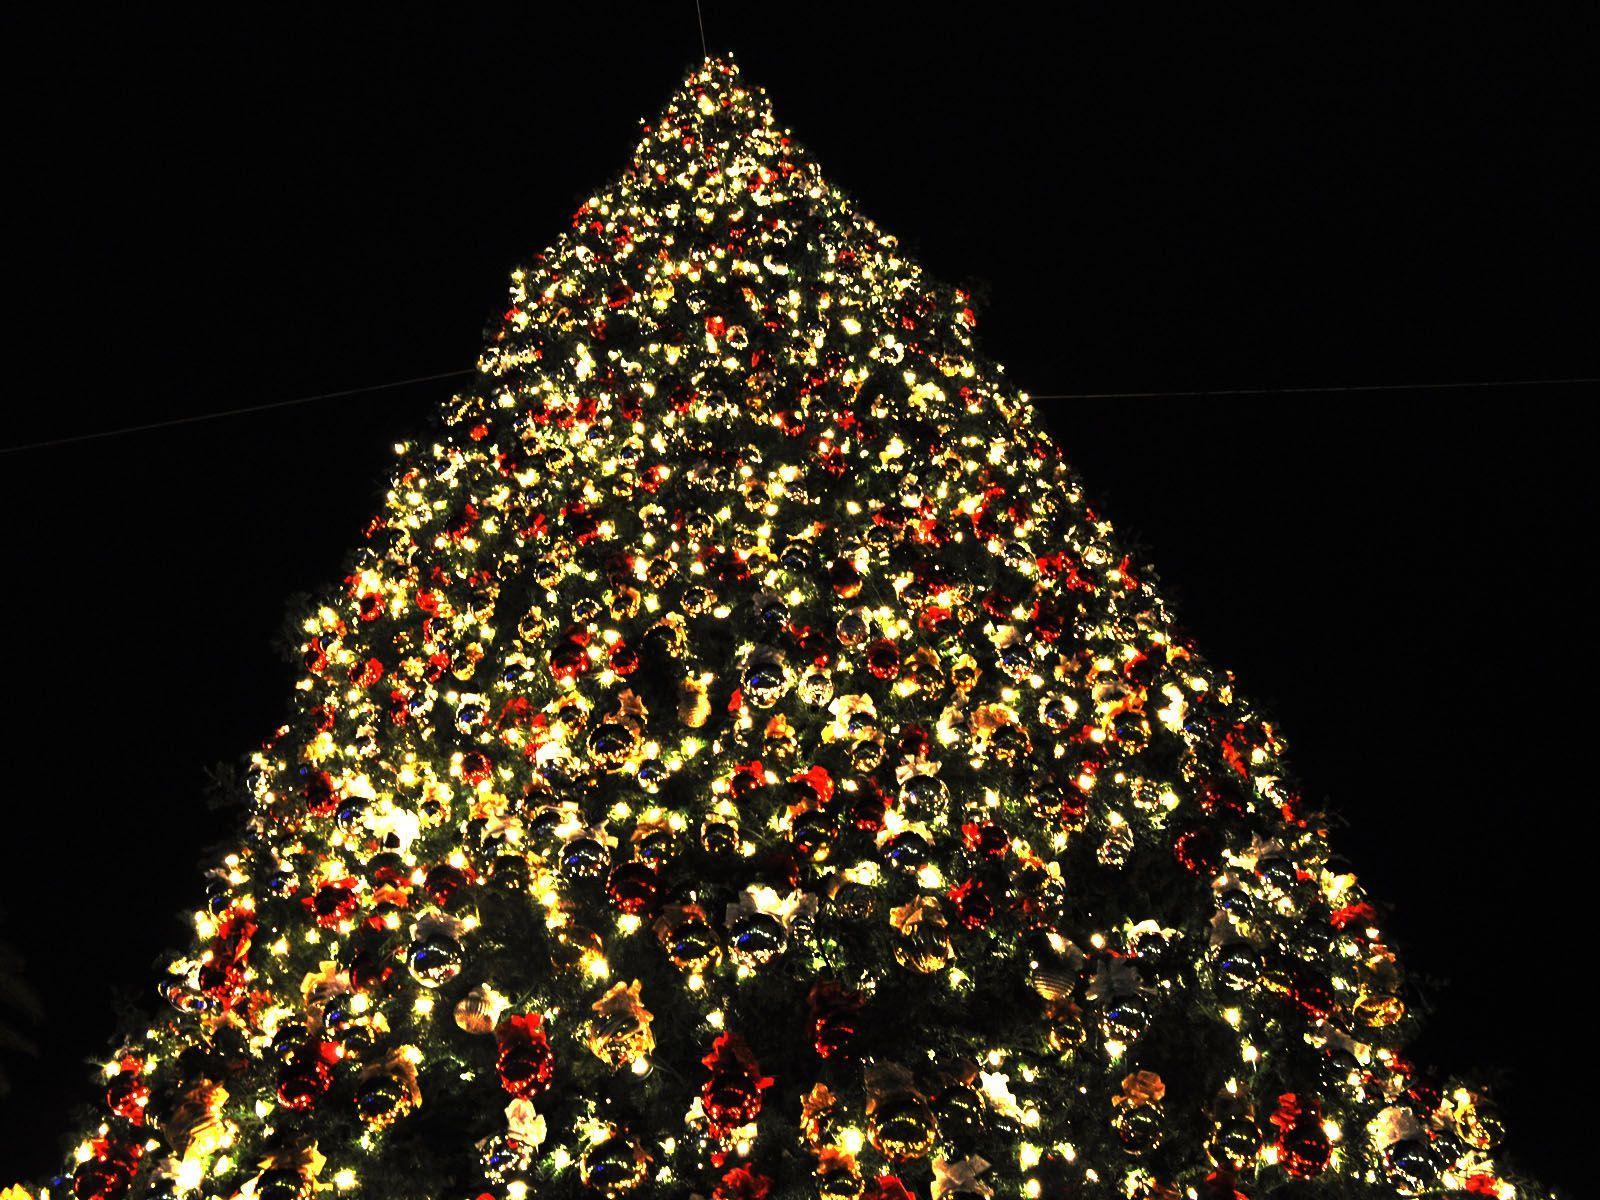 Christmas tree competition introduced to encourage area holiday